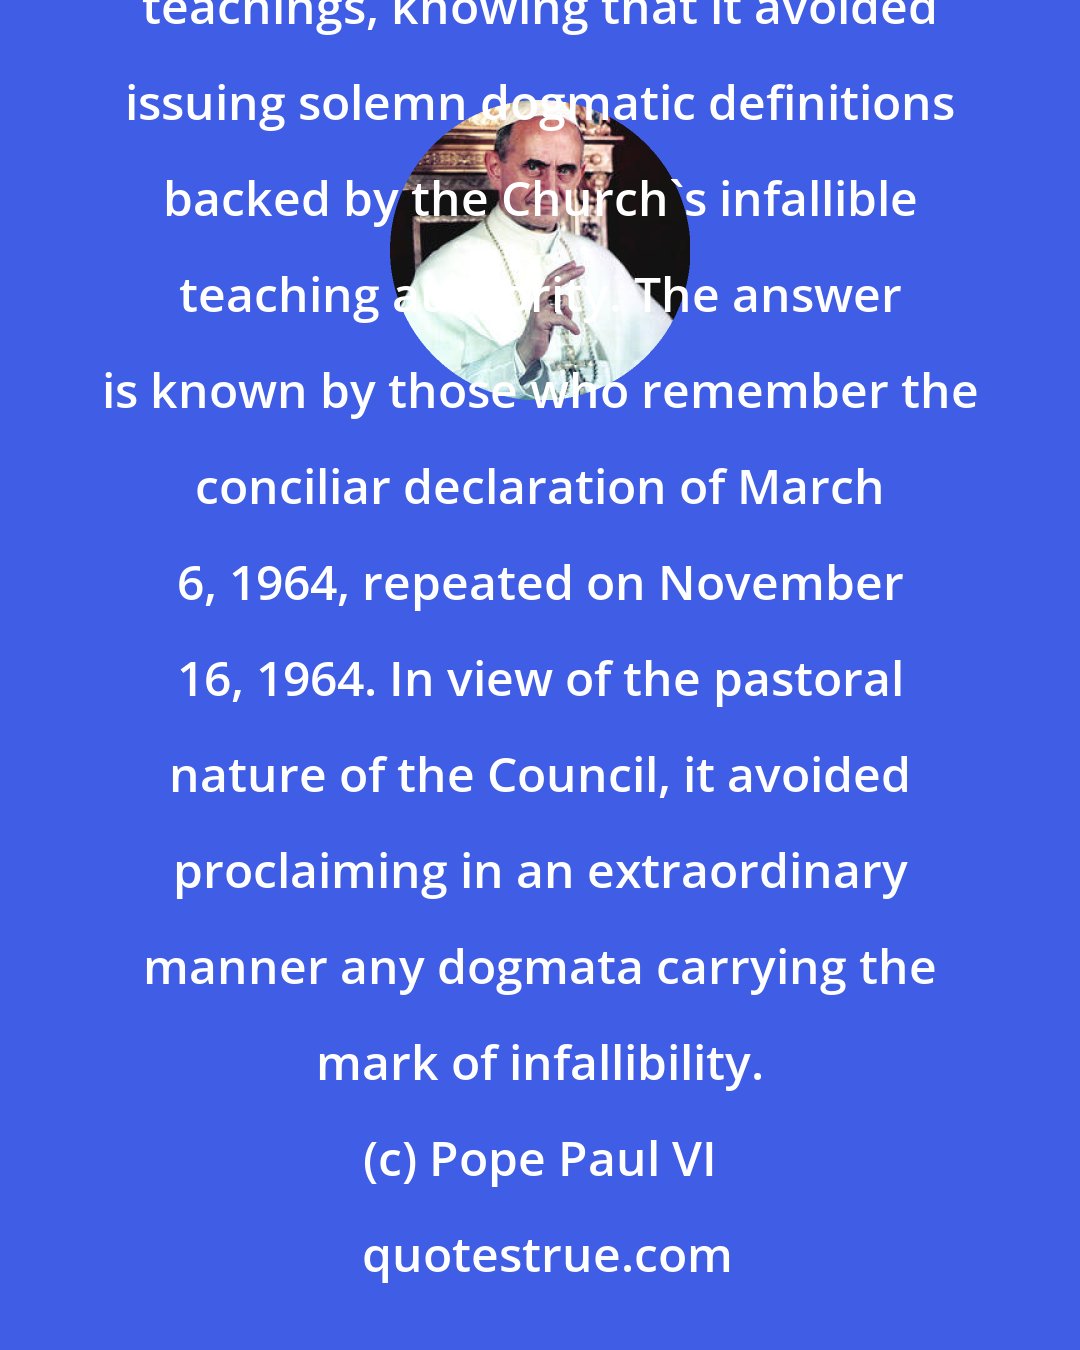 Pope Paul VI: There are those who ask what authority, what theological qualification, the Council intended to give to its teachings, knowing that it avoided issuing solemn dogmatic definitions backed by the Church's infallible teaching authority. The answer is known by those who remember the conciliar declaration of March 6, 1964, repeated on November 16, 1964. In view of the pastoral nature of the Council, it avoided proclaiming in an extraordinary manner any dogmata carrying the mark of infallibility.